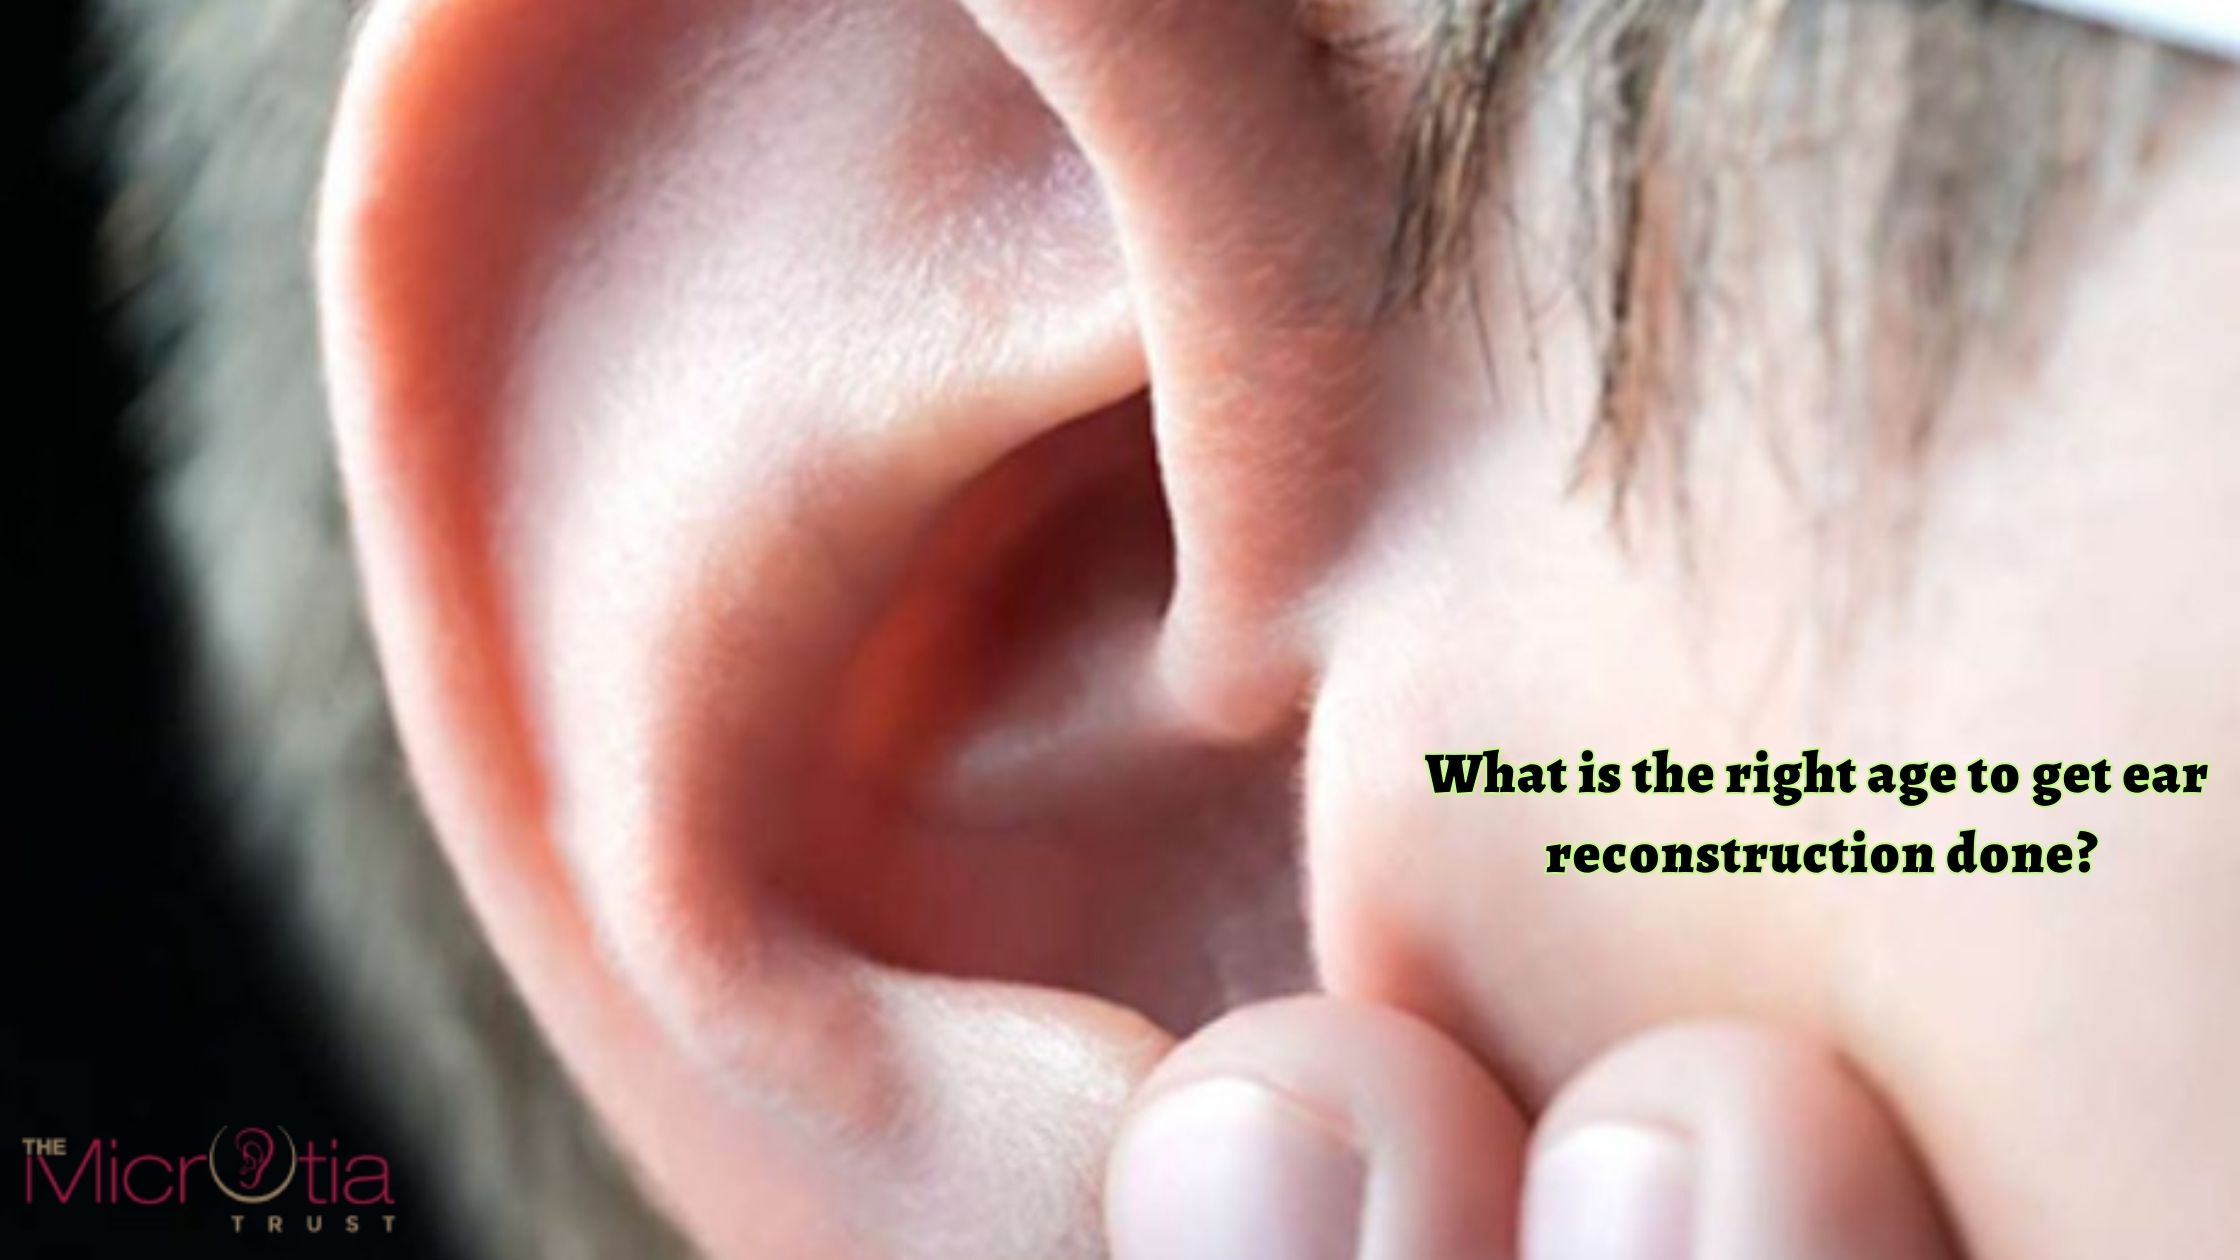 What is the right age to get ear reconstruction done